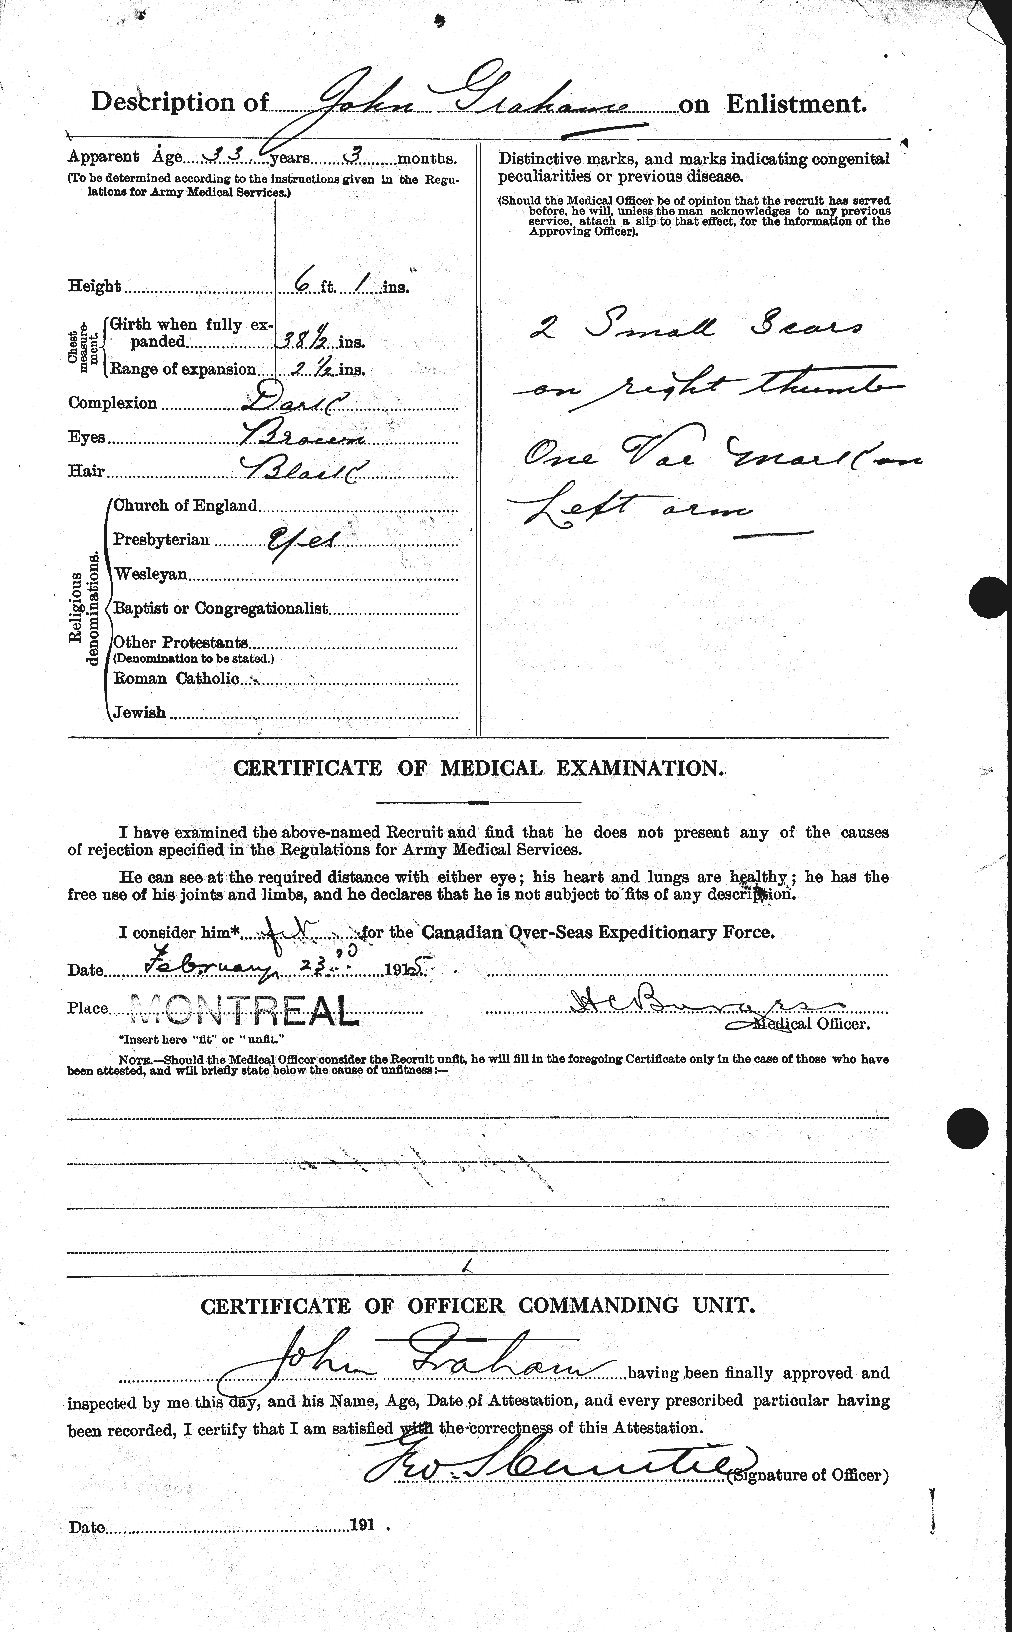 Personnel Records of the First World War - CEF 359111b